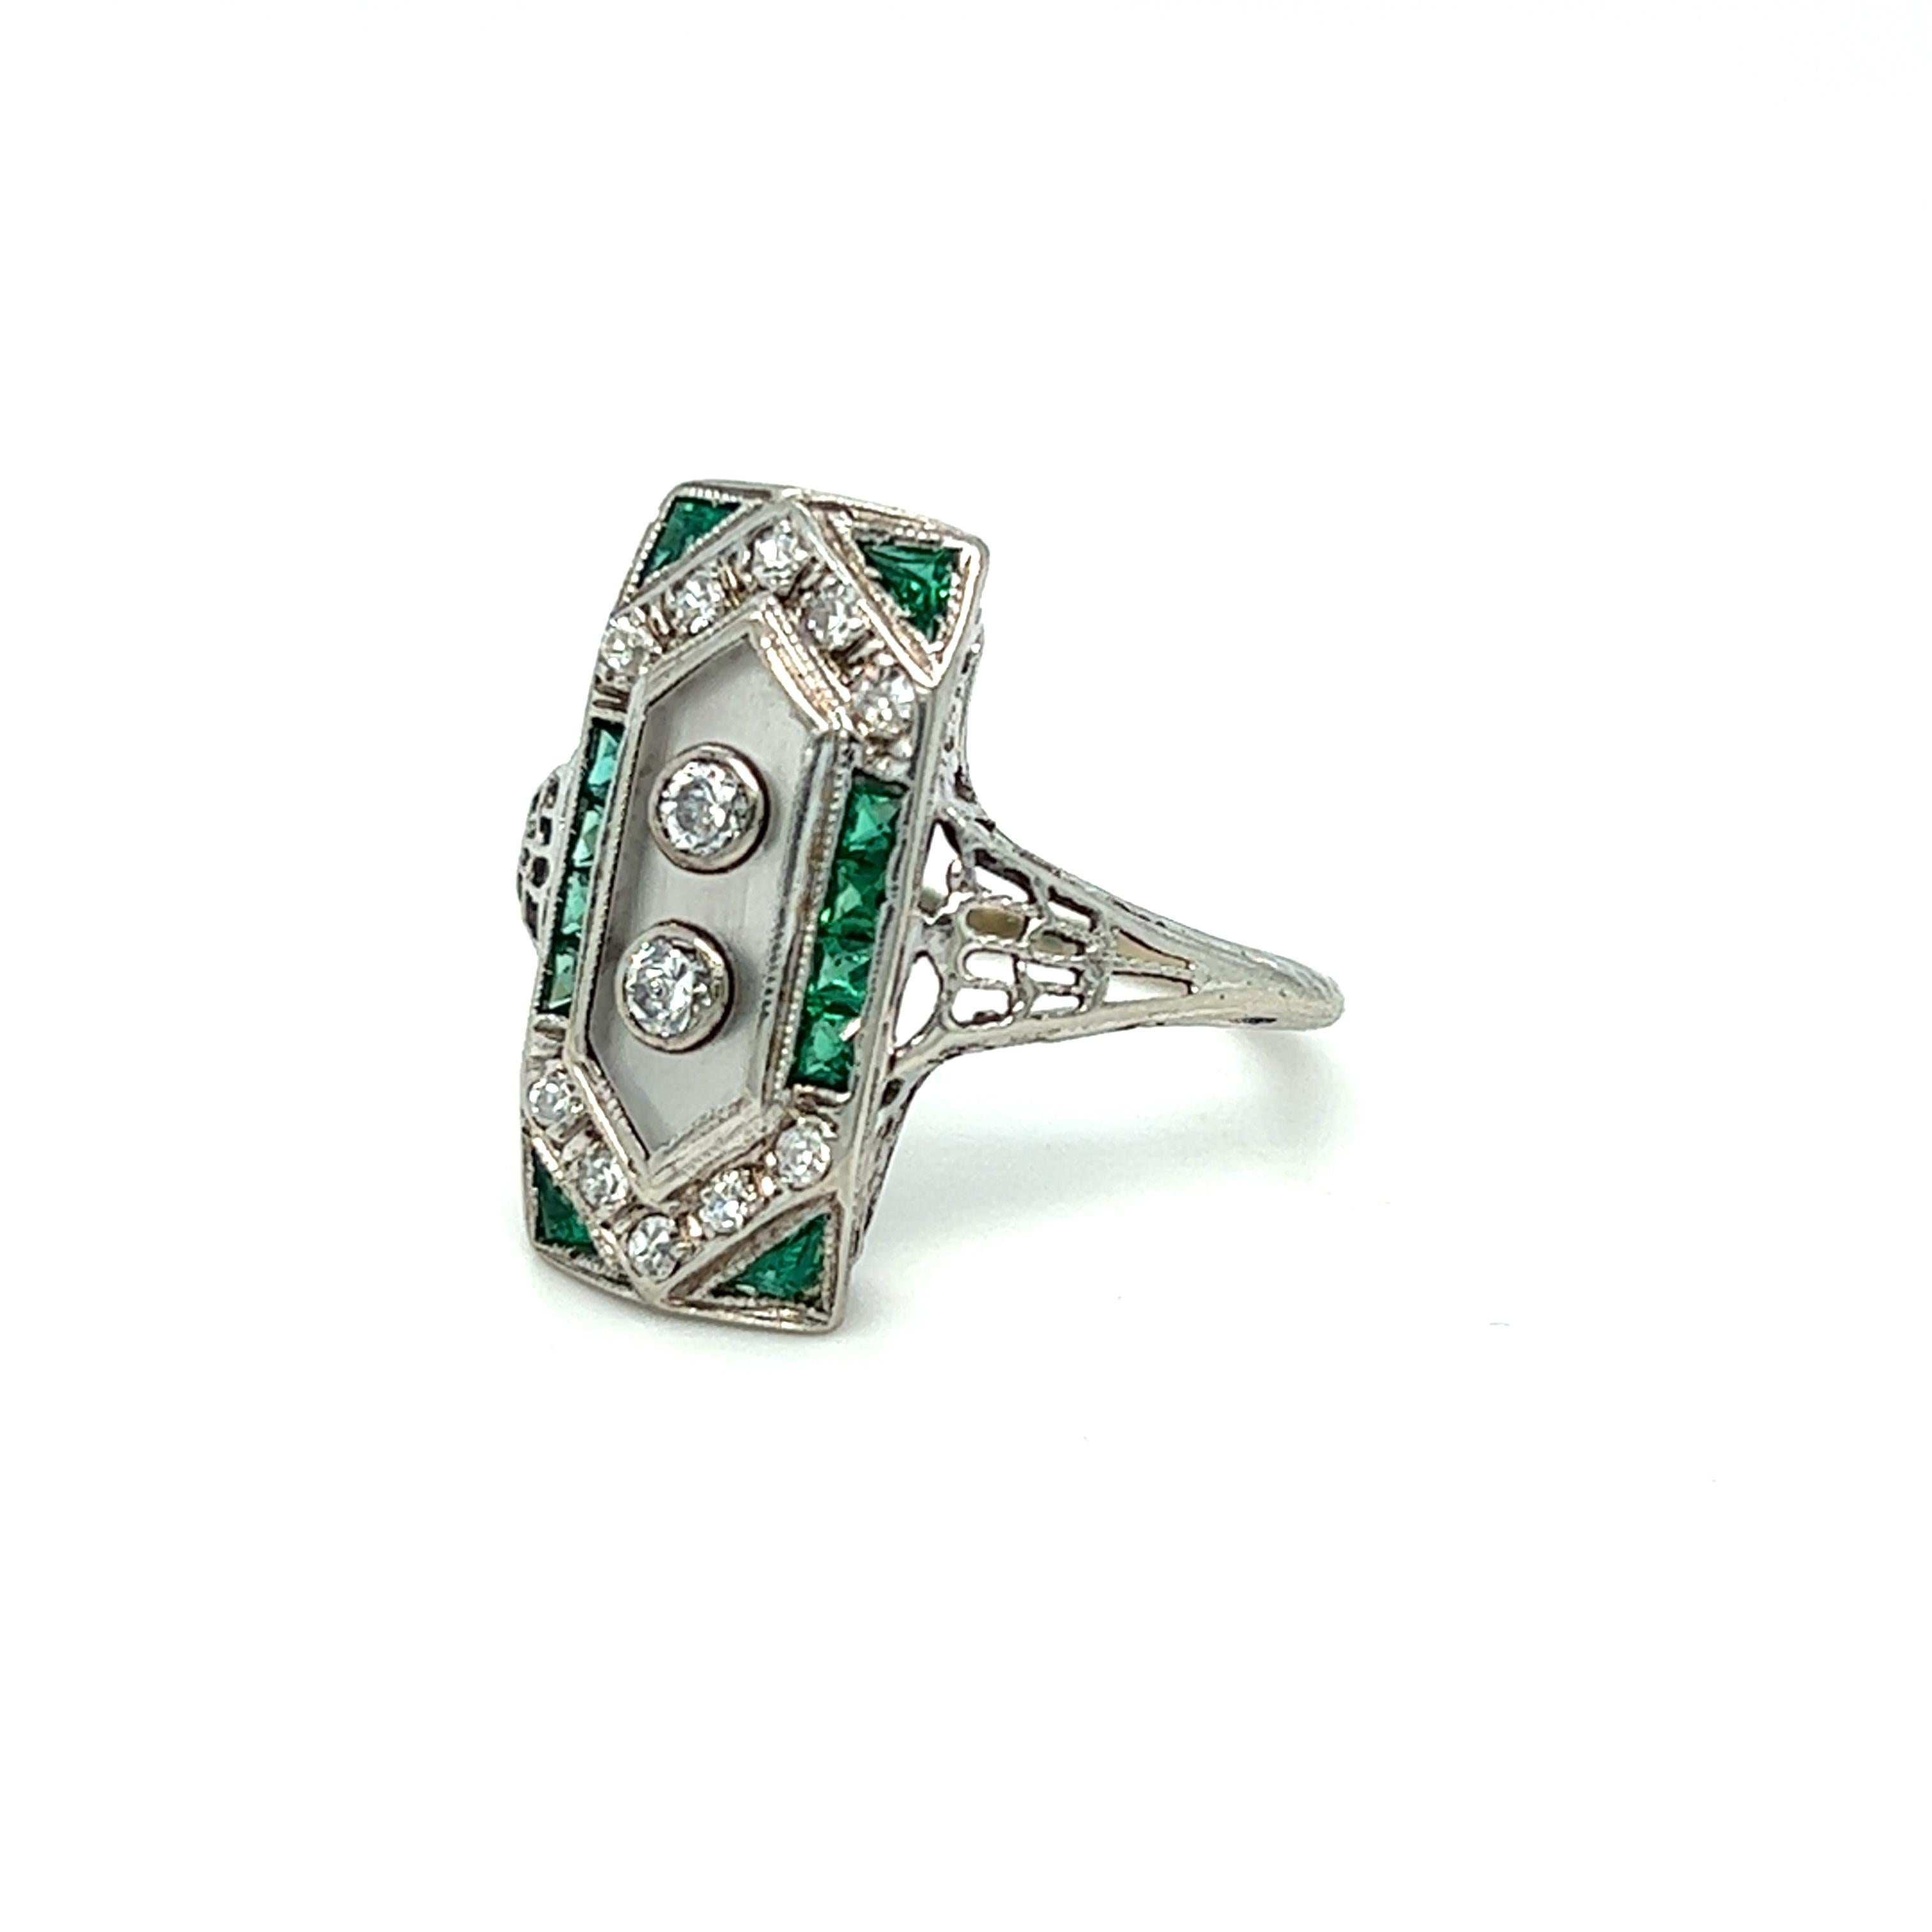 From our antique collection, this beautiful plaque ring contains ten European Cut diamonds weighing approximately 0.40 carat total, eight princess cut and four triangular cut emeralds weighing approximately 0.36 carat total. The two diamonds at